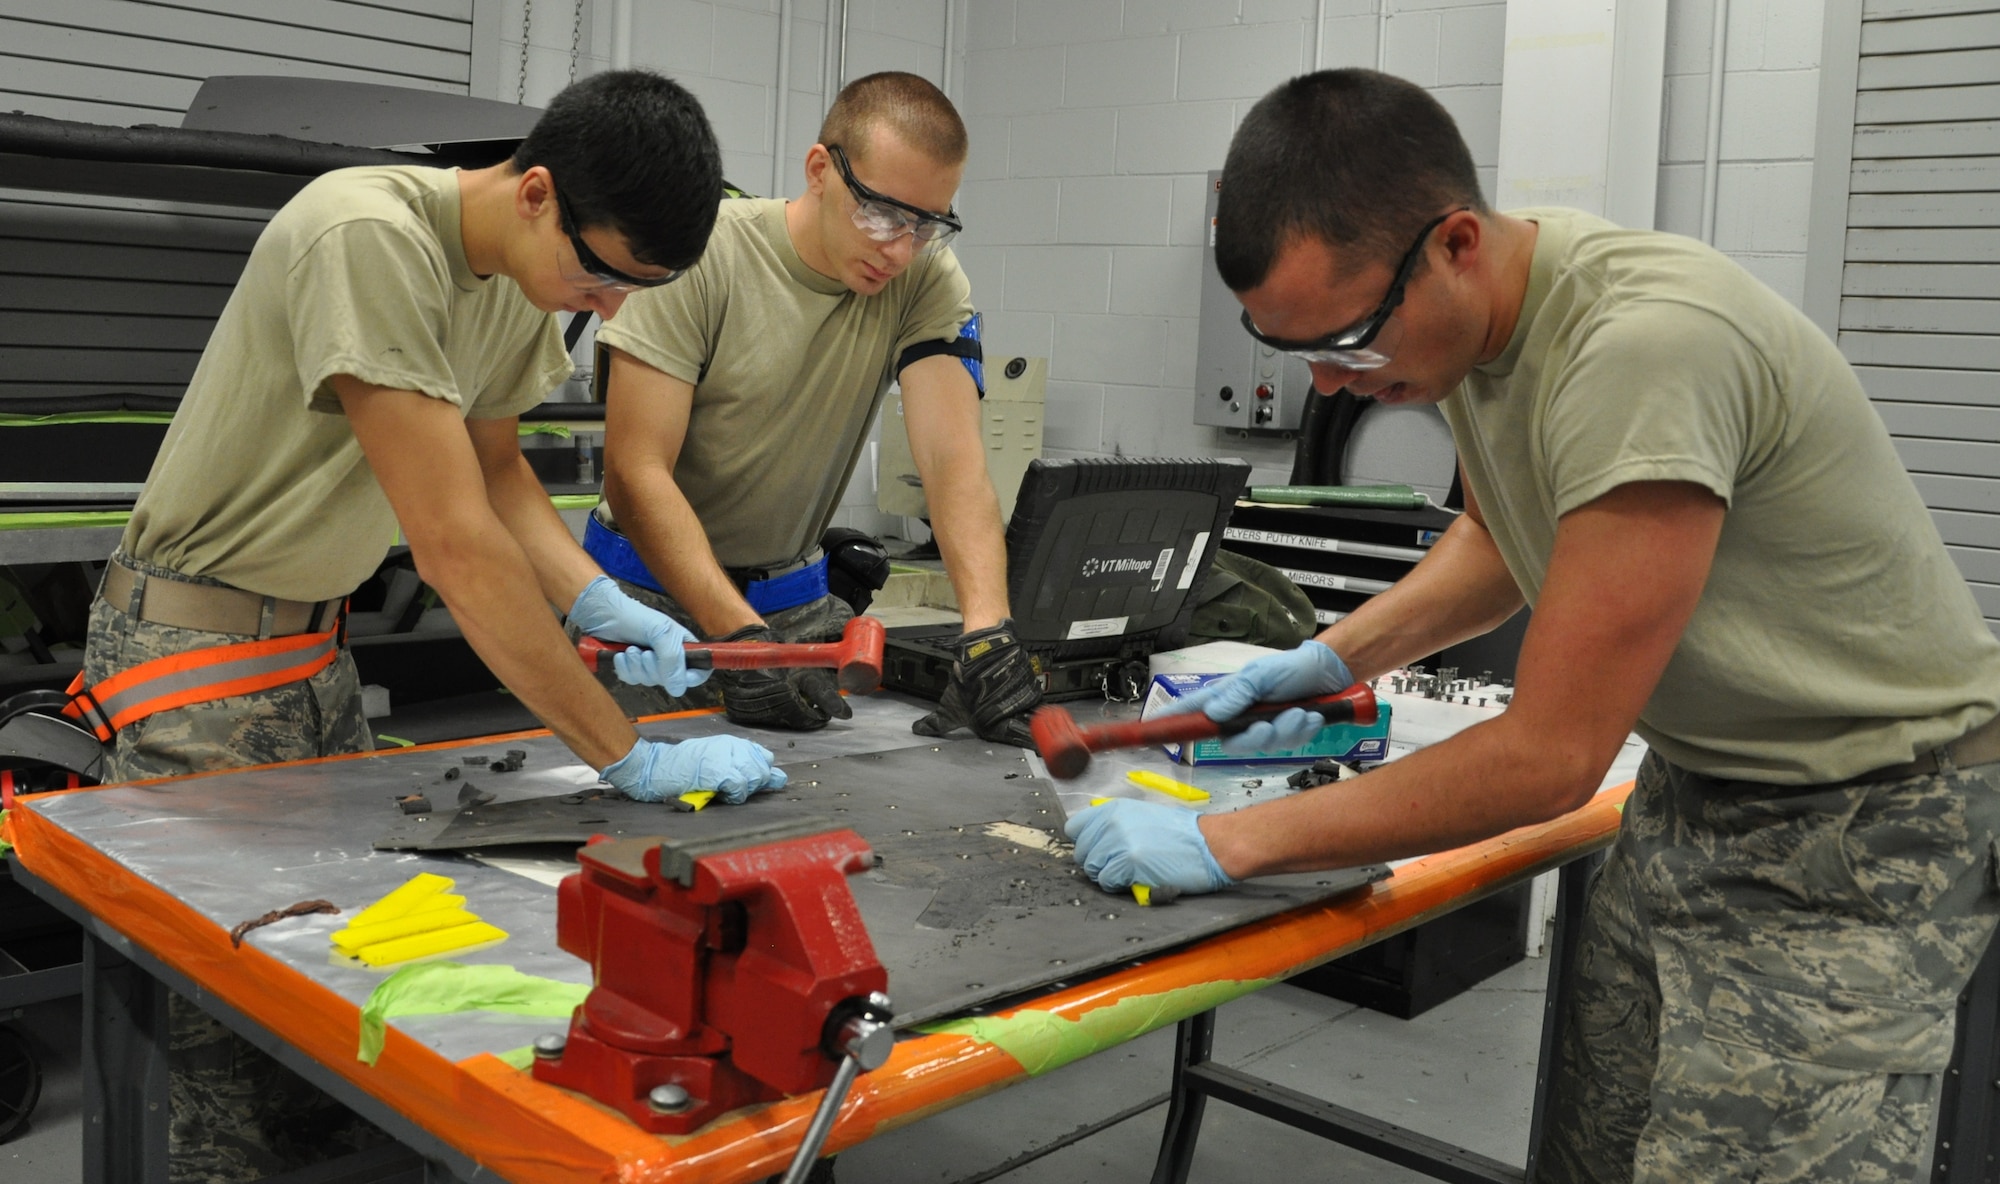 Senior Airman Zachary Kugler, 325th Maintenance Squadron Low Observable Journeyman, Airman 1st Class Keenan McCormack, 325th MXS Low Observable apprentice, and Airman 1st Class Samuel Schroeder 325th MXS Low Observable apprentice, chisel damaged coating off of a panel Aug. 1 in the LO shop at Tyndall Air Force Base. The 325th Maintenance Squadron Low Observable makes sure the F-22 Raptors at Tyndall maintain their stealth capabilities by restoring and maintaining the Low Observable coatings on the aircraft. (U.S. Air Force photo by Airman 1st Class Alex Echols)